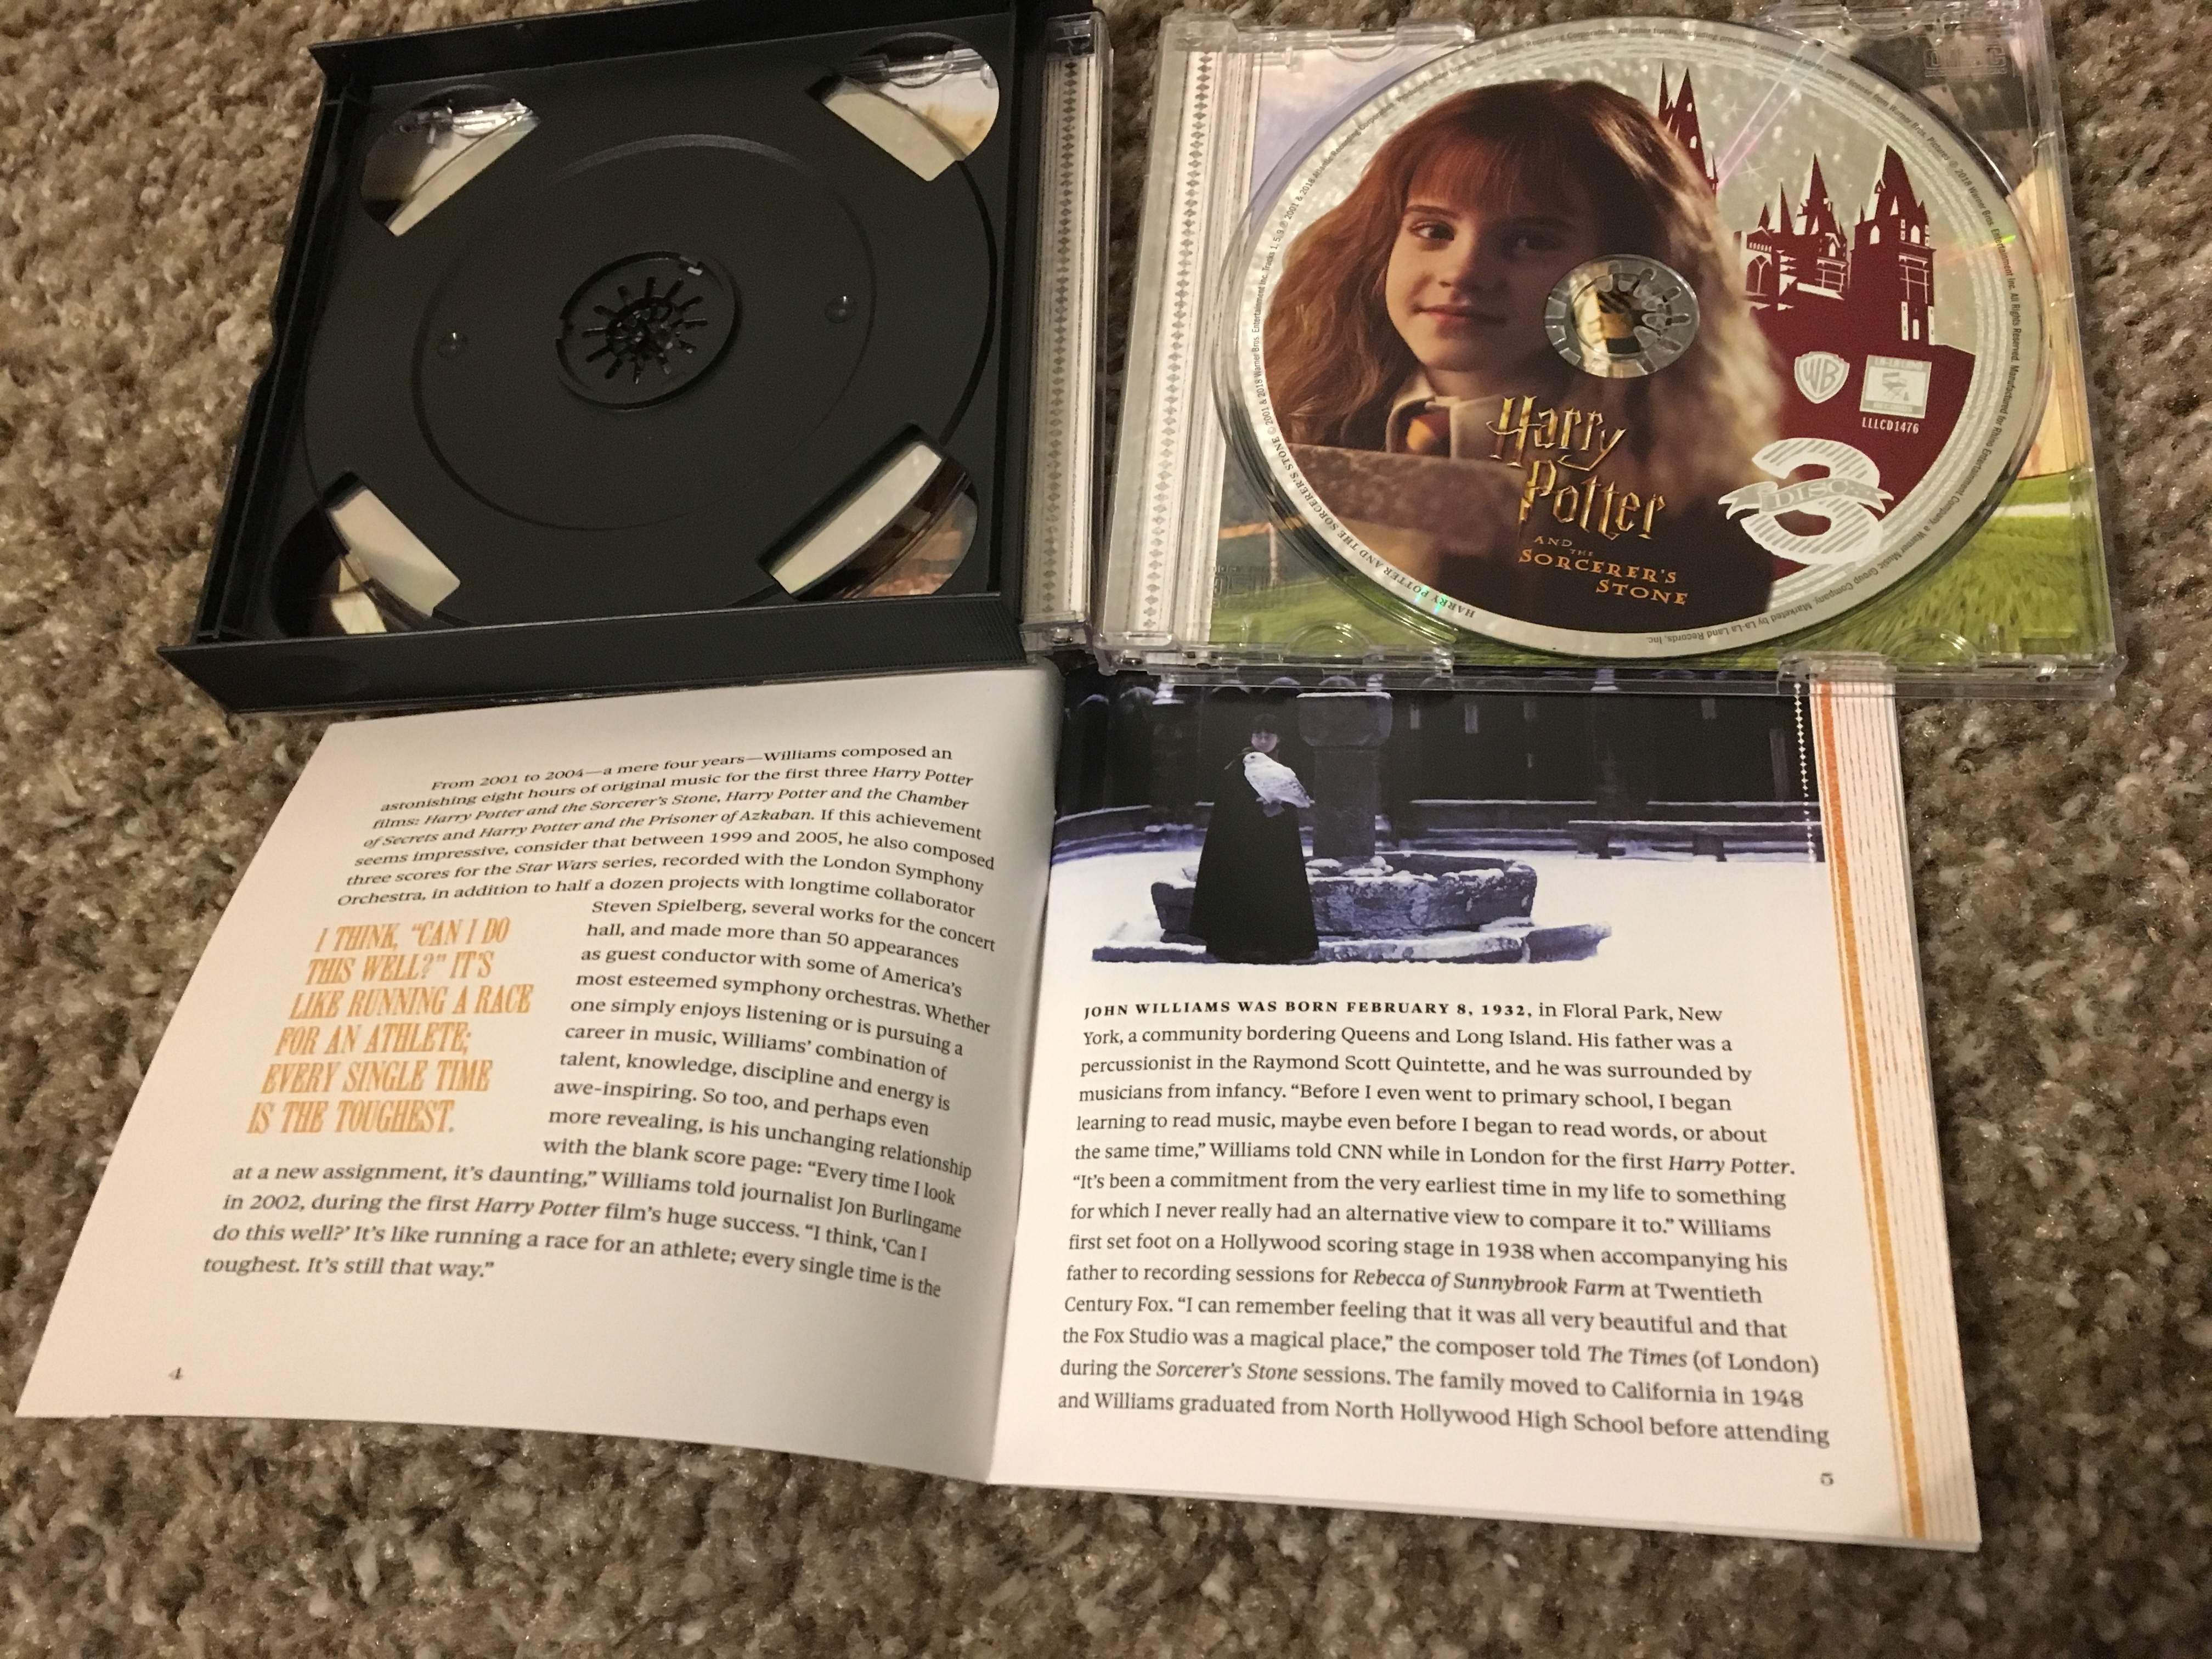 “Harry Potter: The John Williams Soundtrack Collection”, Disc 3, “Sorcerer’s Stone” score with liner notes